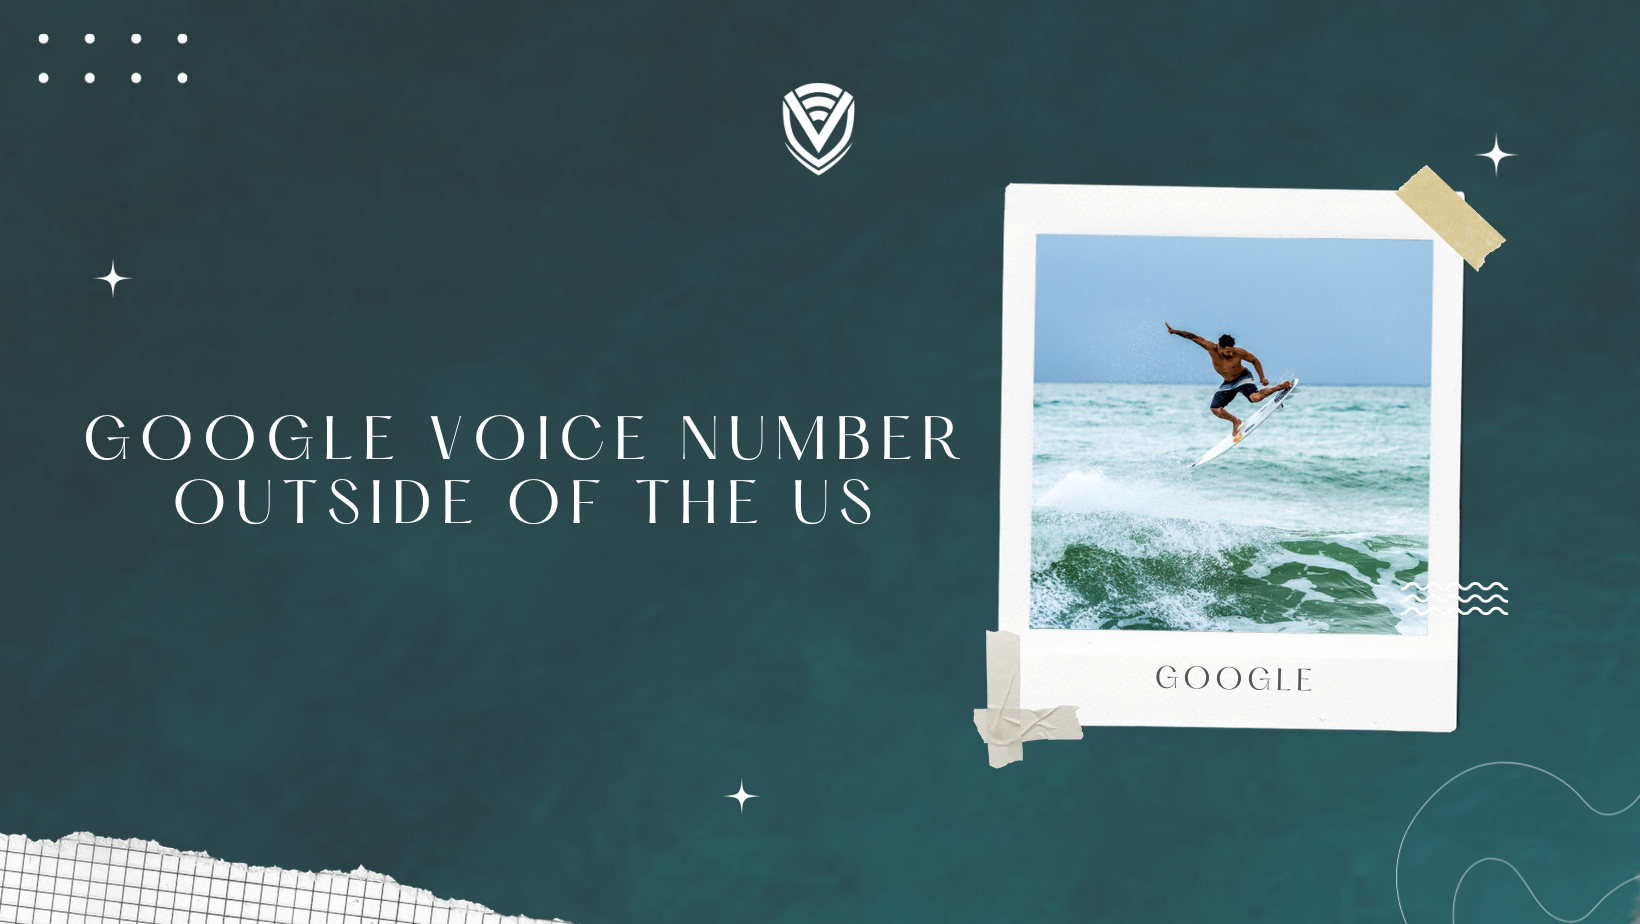 How to Get a Google Voice Number Outside of the US